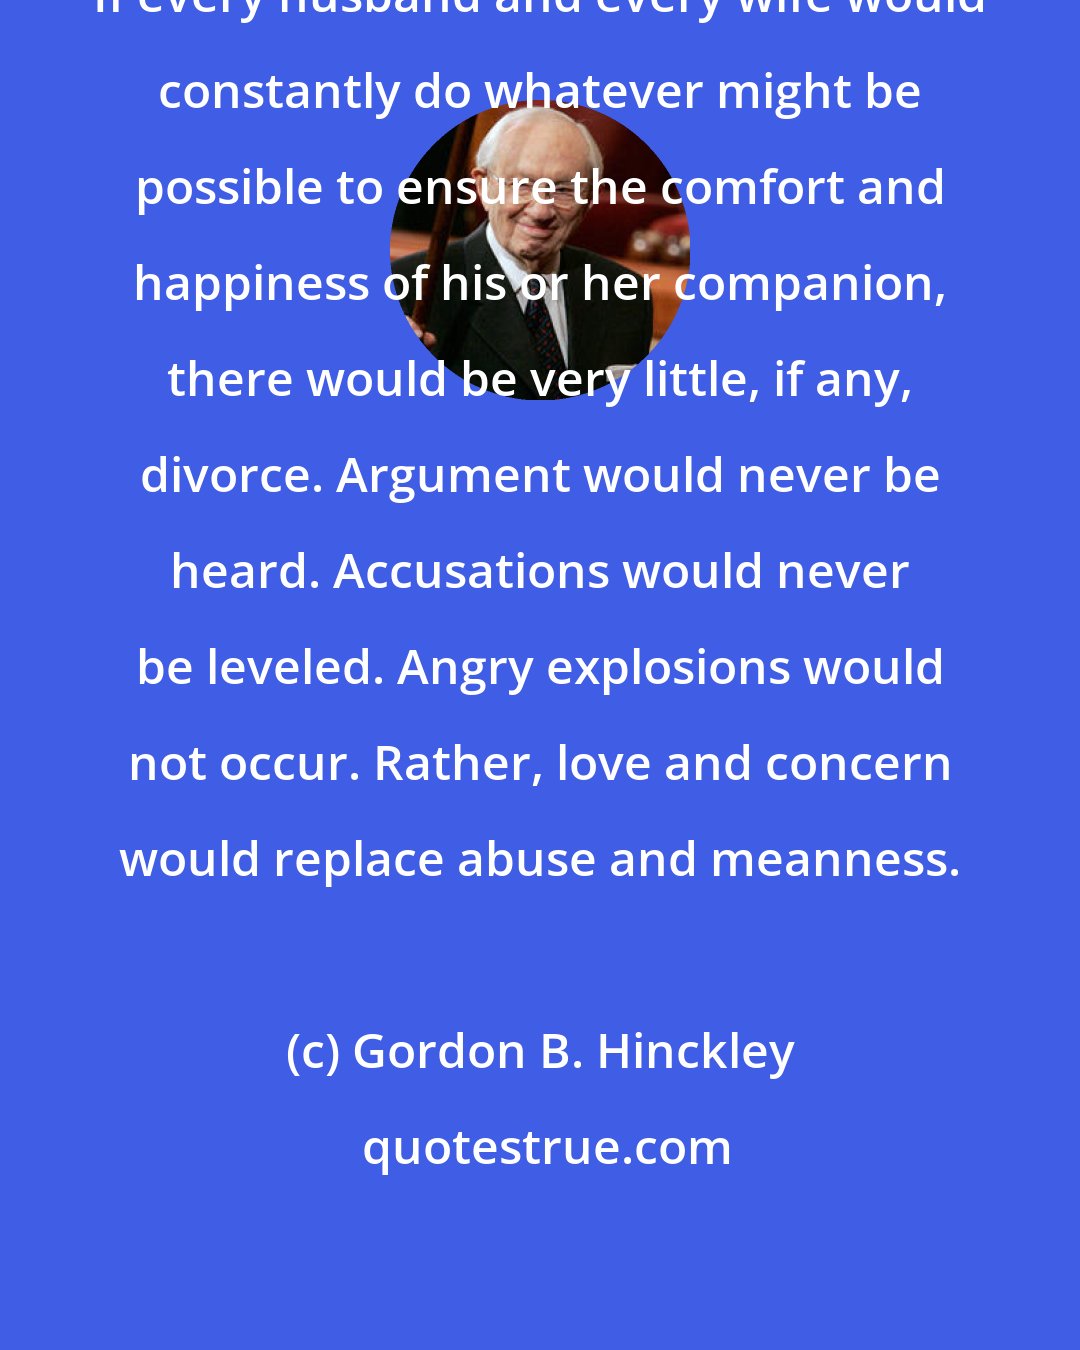 Gordon B. Hinckley: If every husband and every wife would constantly do whatever might be possible to ensure the comfort and happiness of his or her companion, there would be very little, if any, divorce. Argument would never be heard. Accusations would never be leveled. Angry explosions would not occur. Rather, love and concern would replace abuse and meanness.